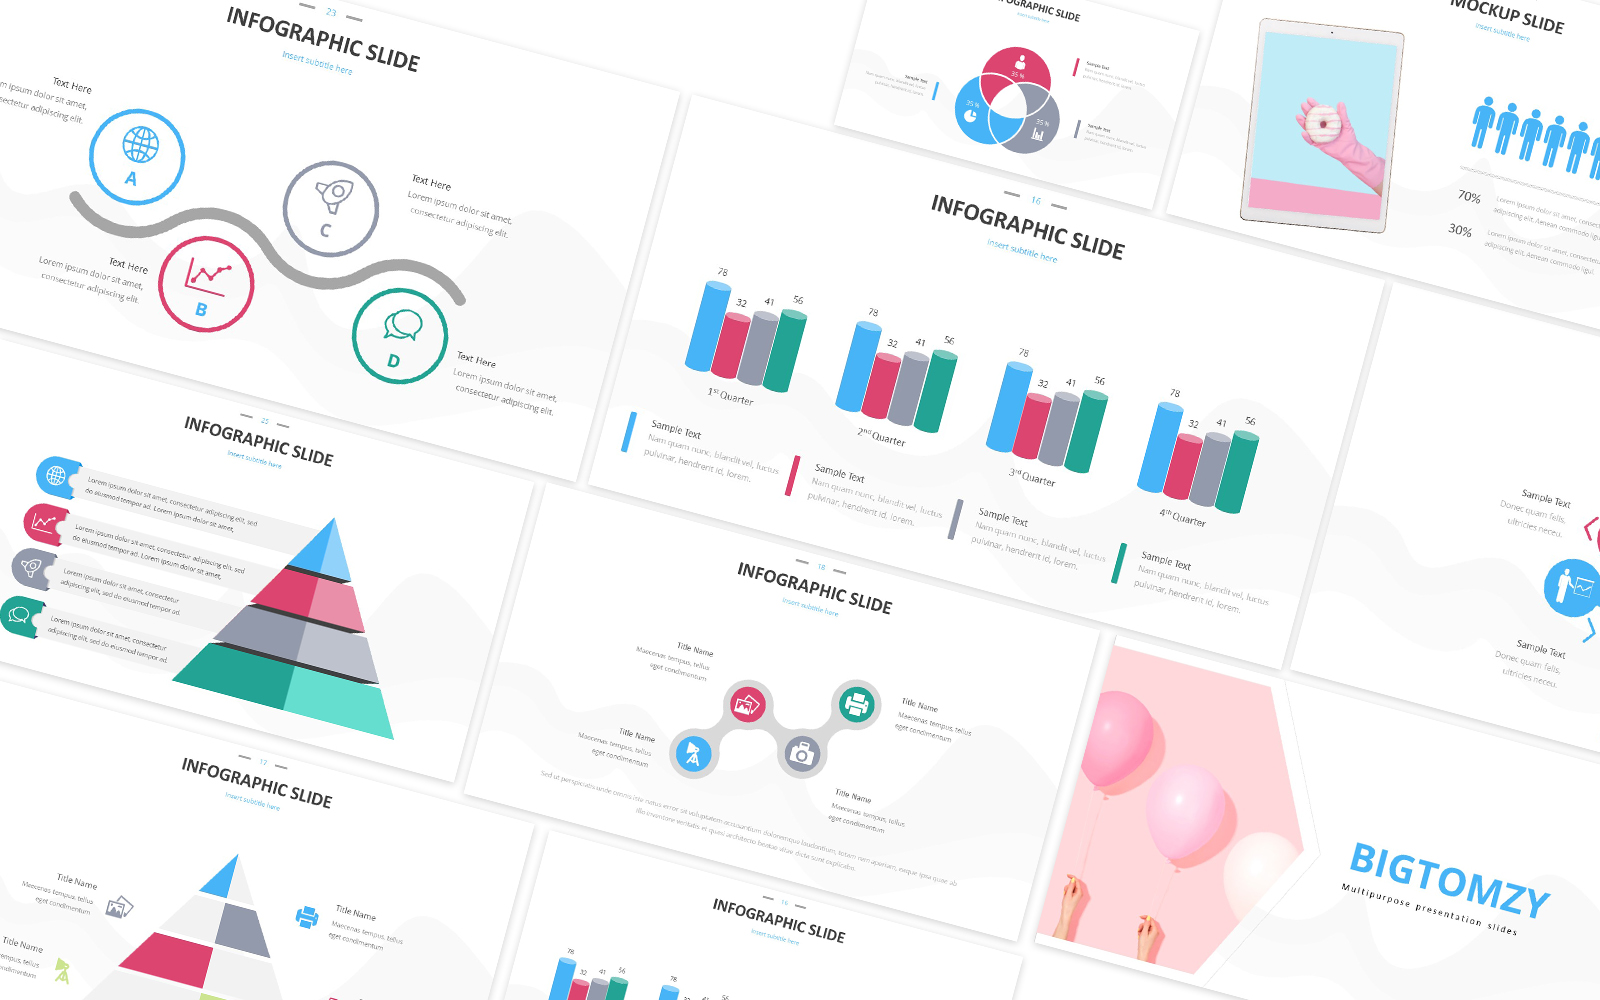 Bigtomzy Multipurpose Powerpoint Template